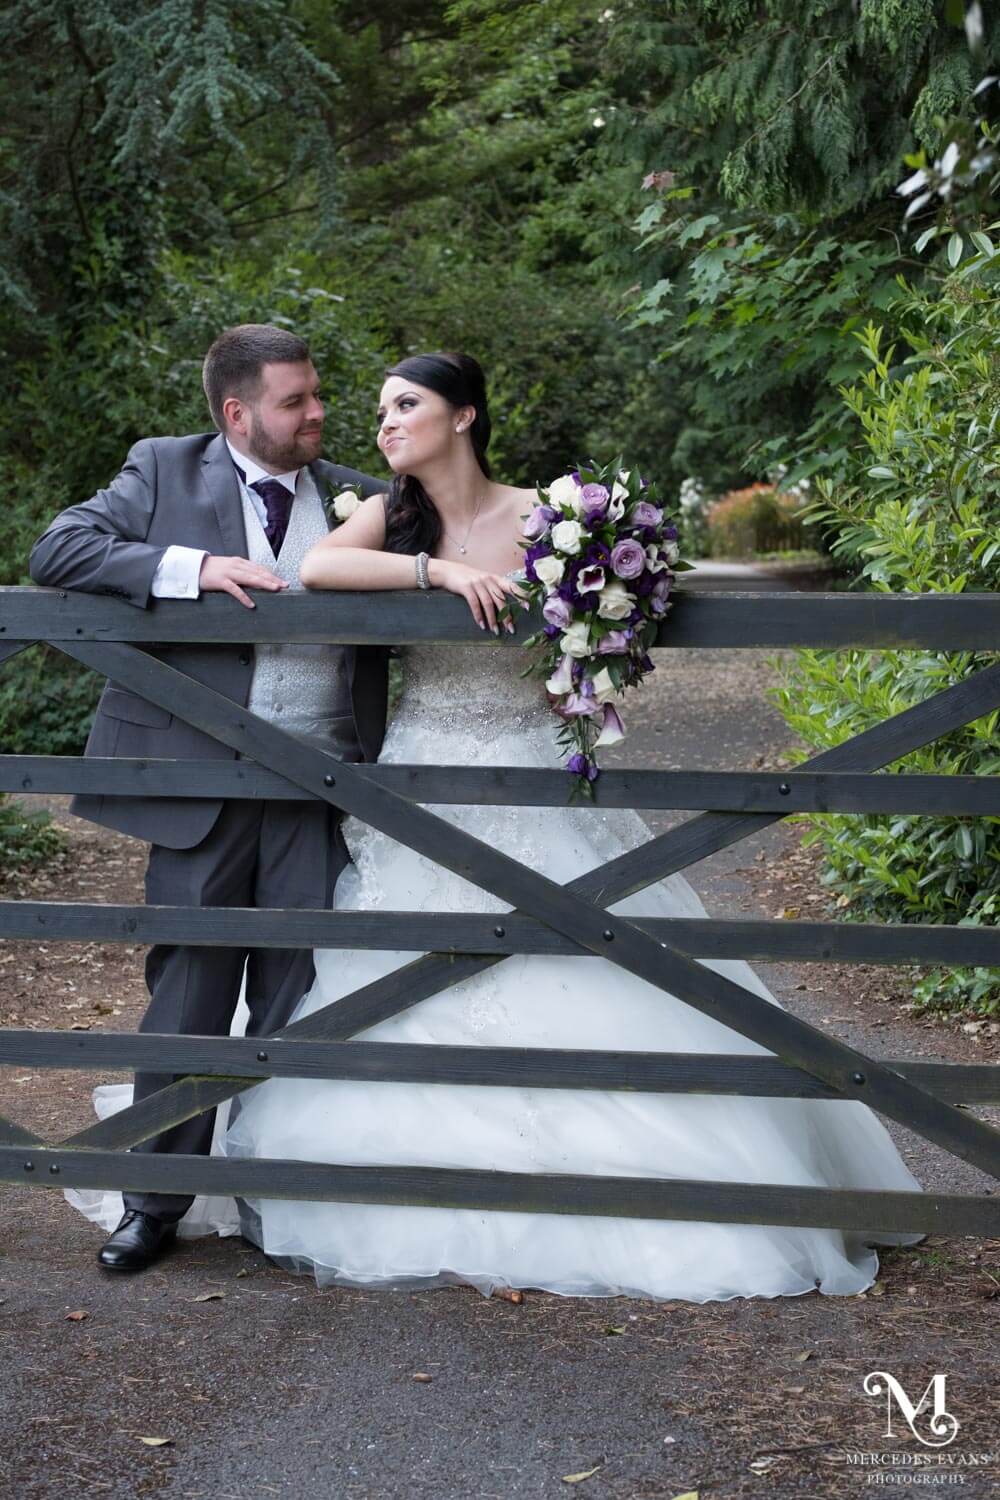 the bride and groom gaze lovingly at each other as they lean against the five bar gate at Frimley Hall